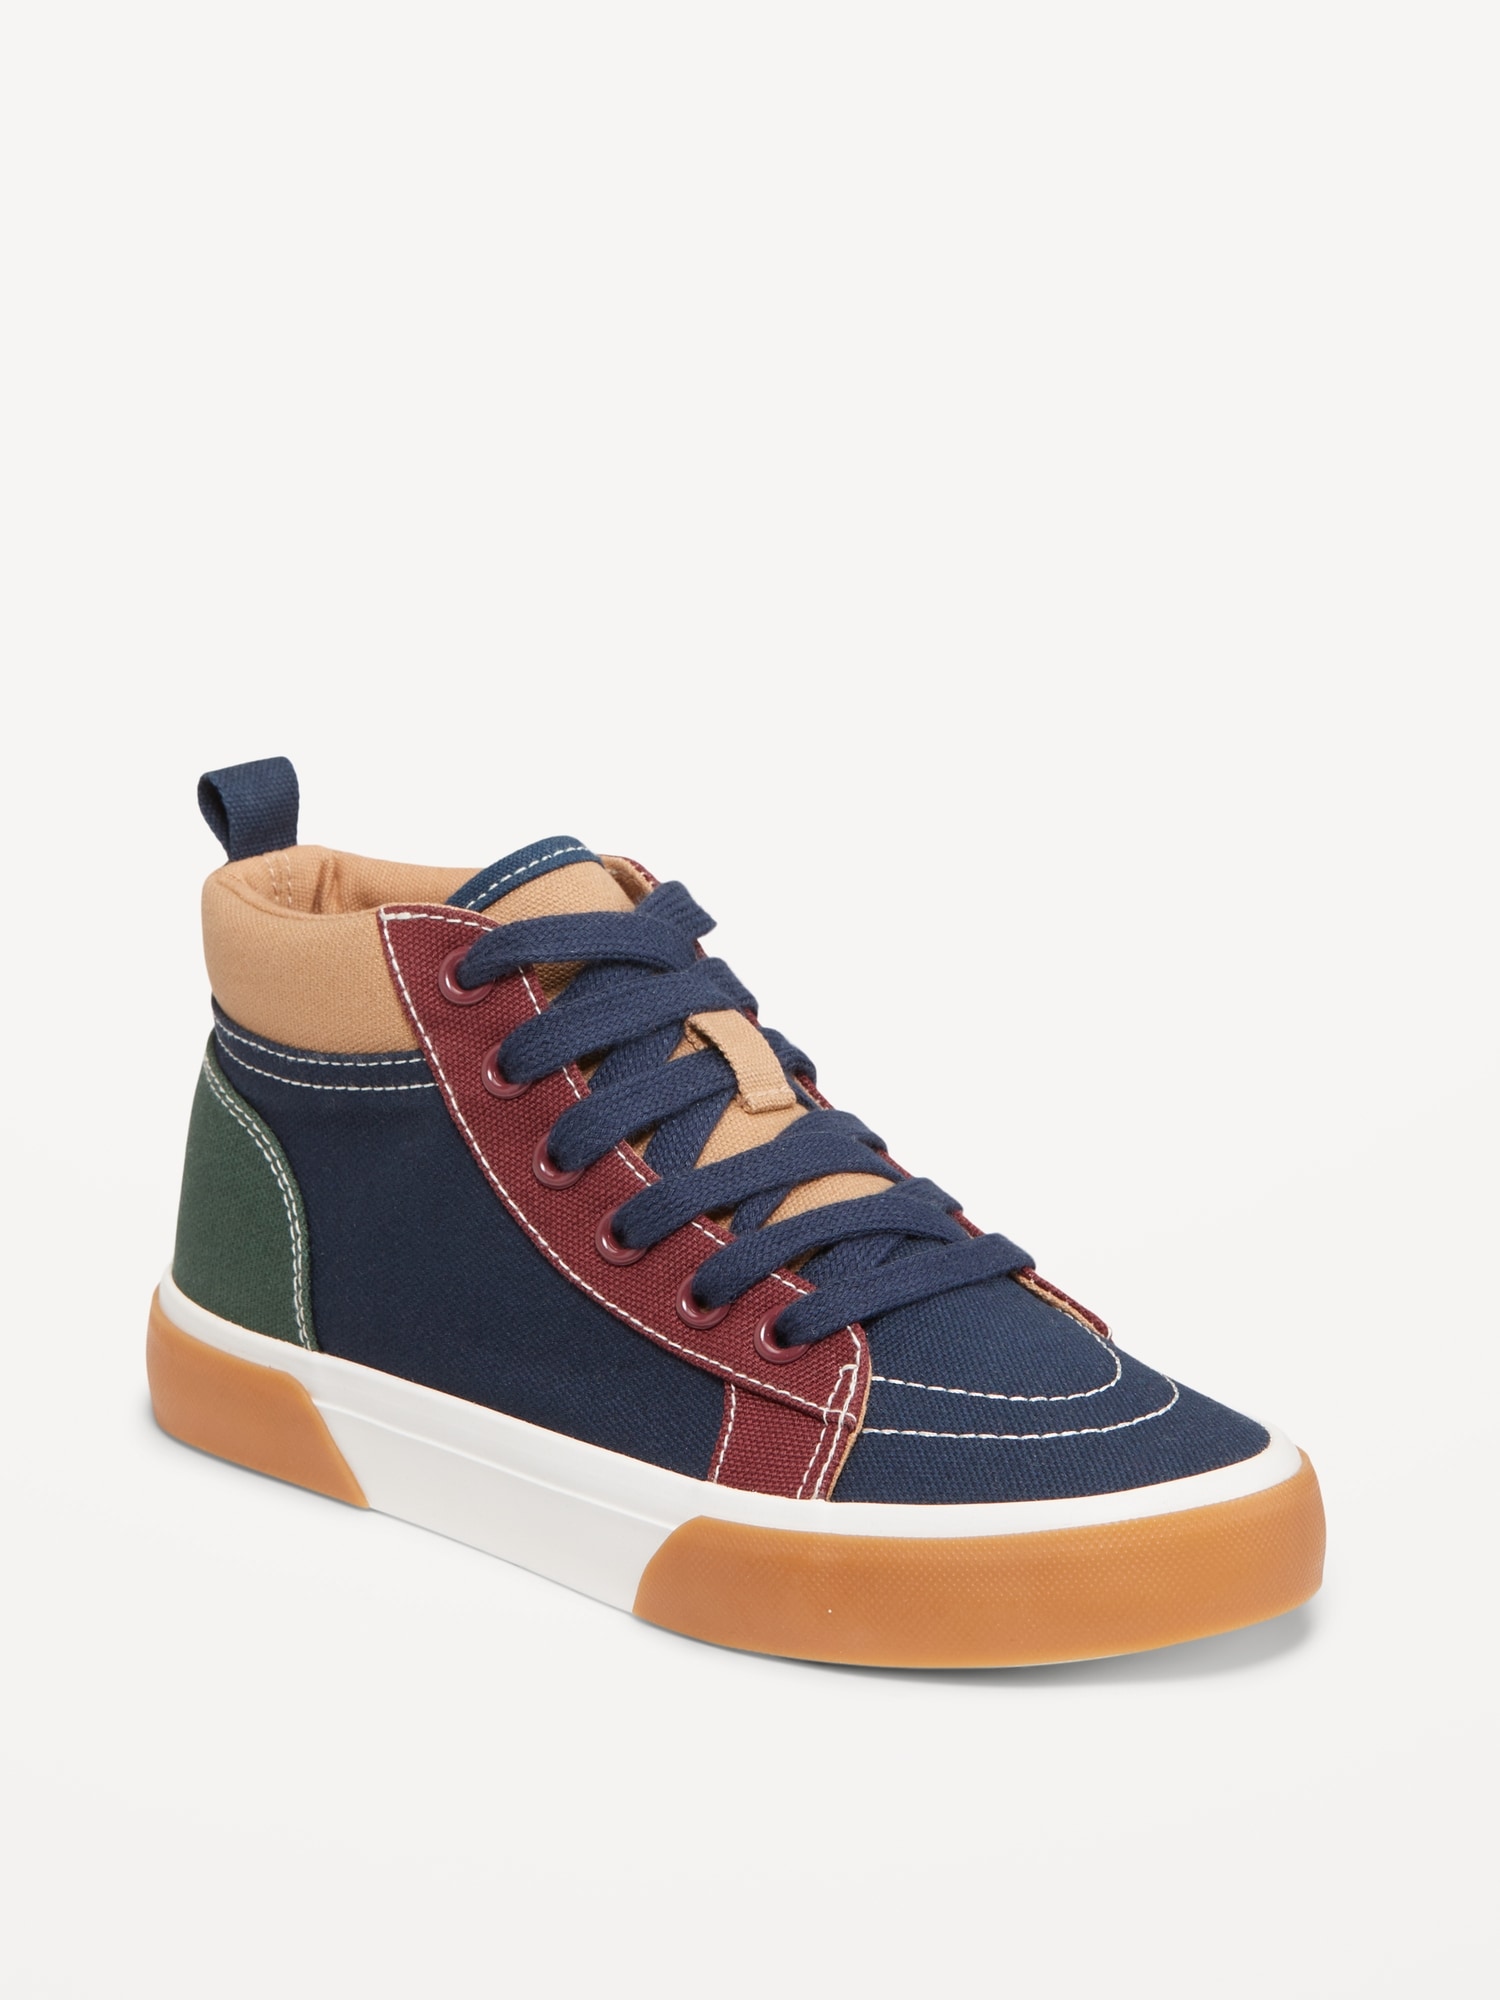 High-Top Canvas Sneakers for Boys